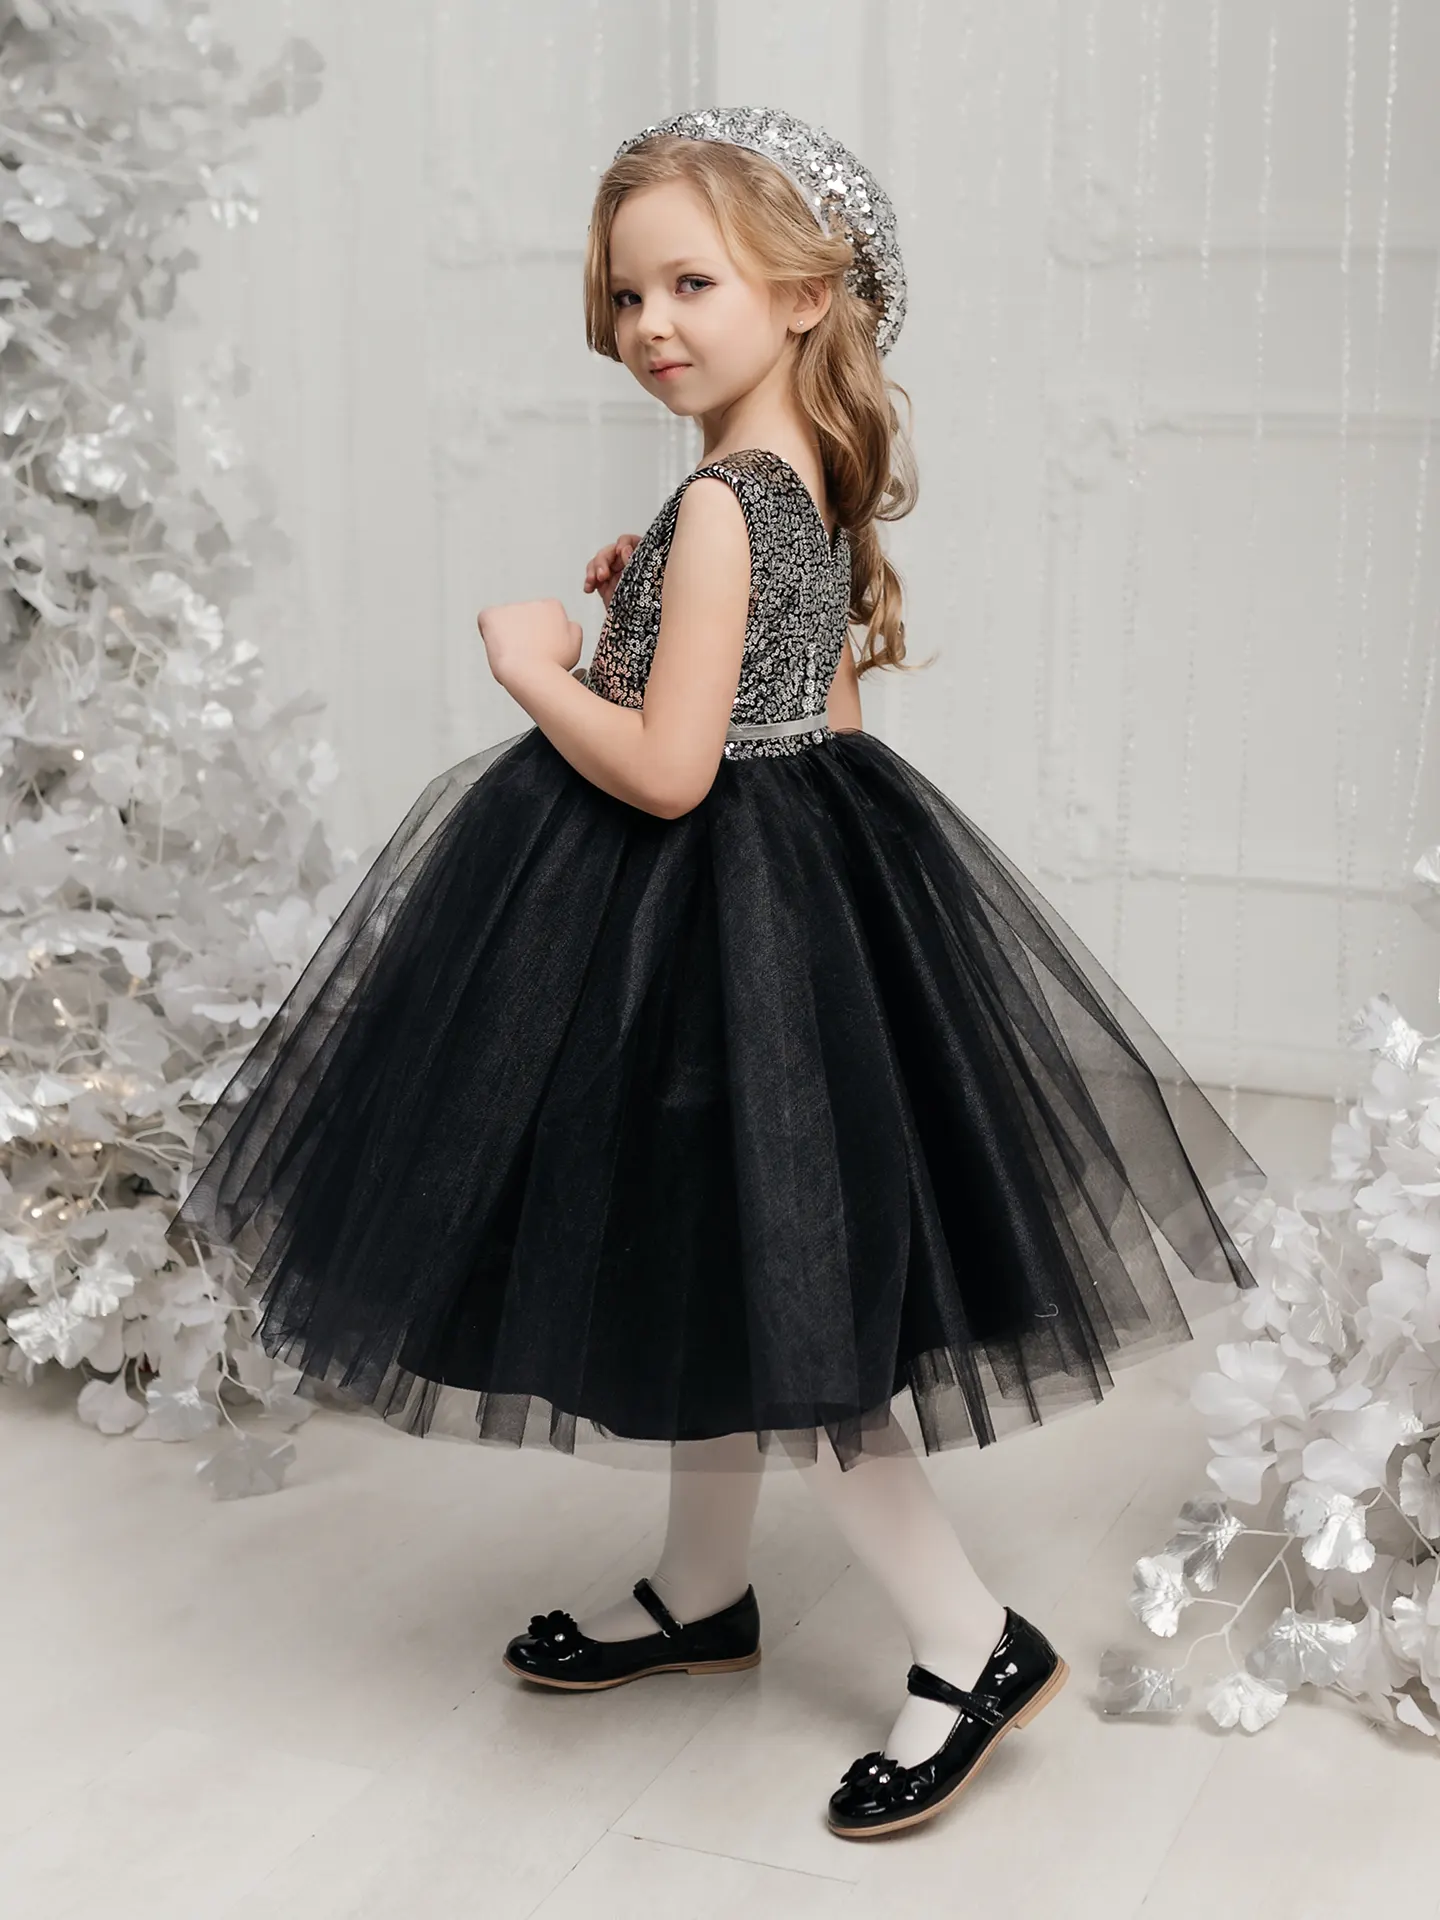 Designer, High-quality, Comfortable, Dubai, Occasion girl's dress with sequins and wide tulle dance skirt